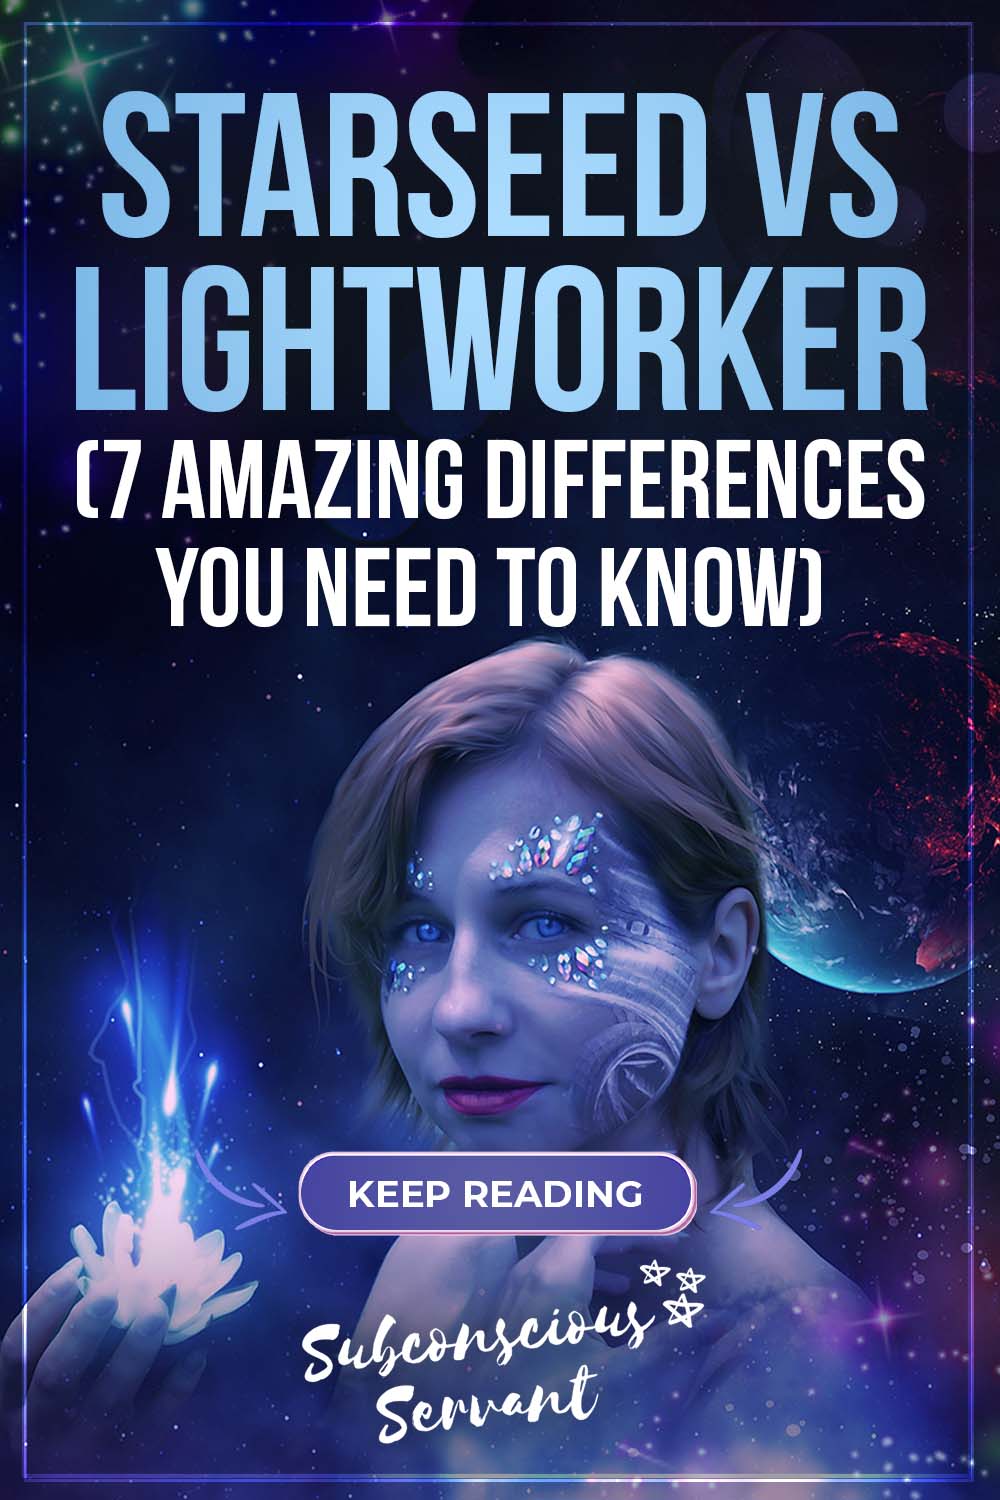 Starseed Vs Lightworker (7 Amazing Differences You Need To Know)